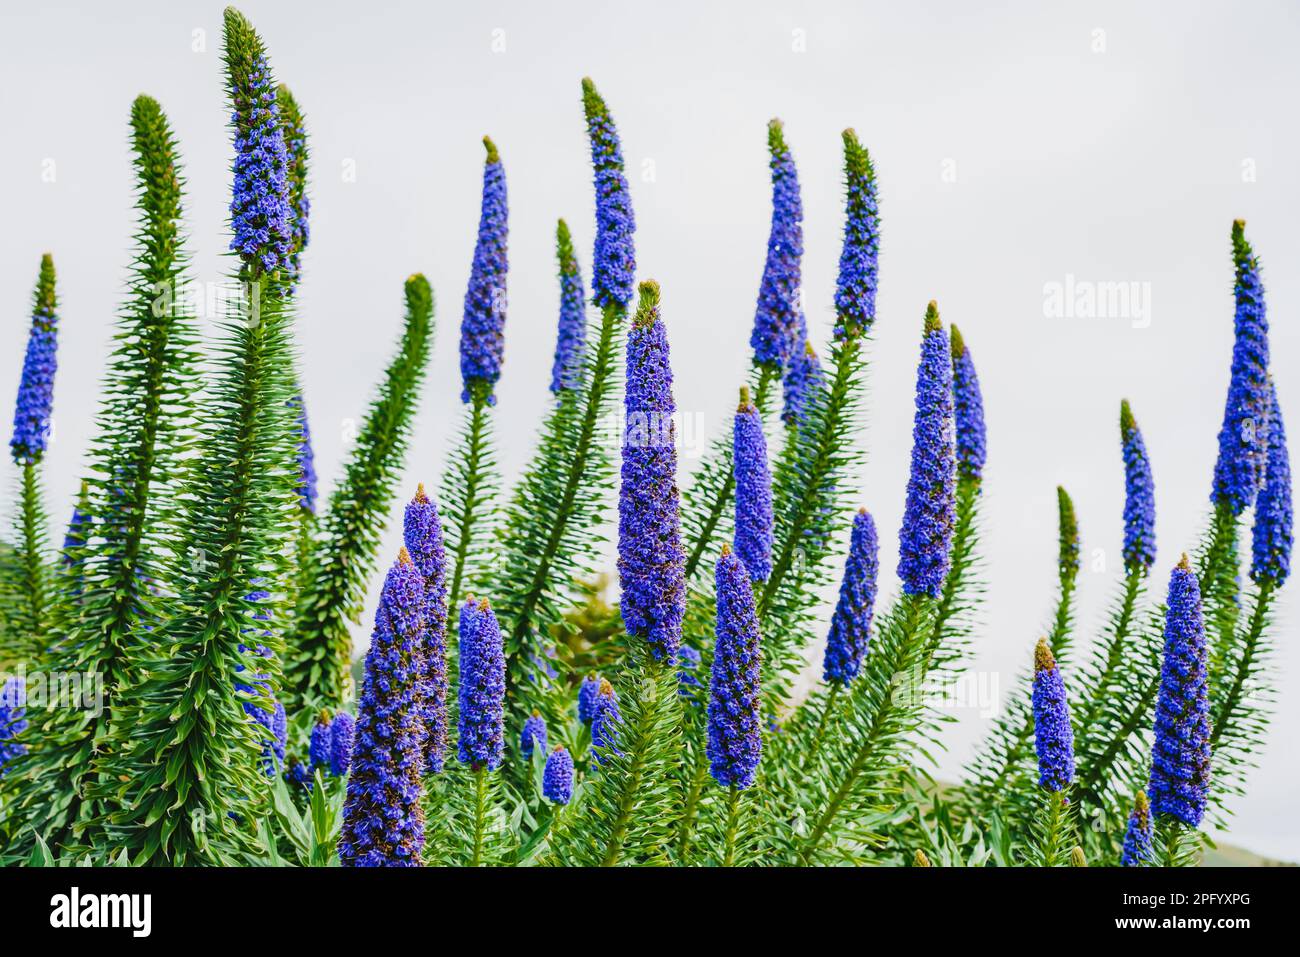 Pride of Madeira ( Echium candicans ), a magnificent conical blue flower spikes. Giant bush in full bloom close-up on the beach in sunny day in Califo Stock Photo